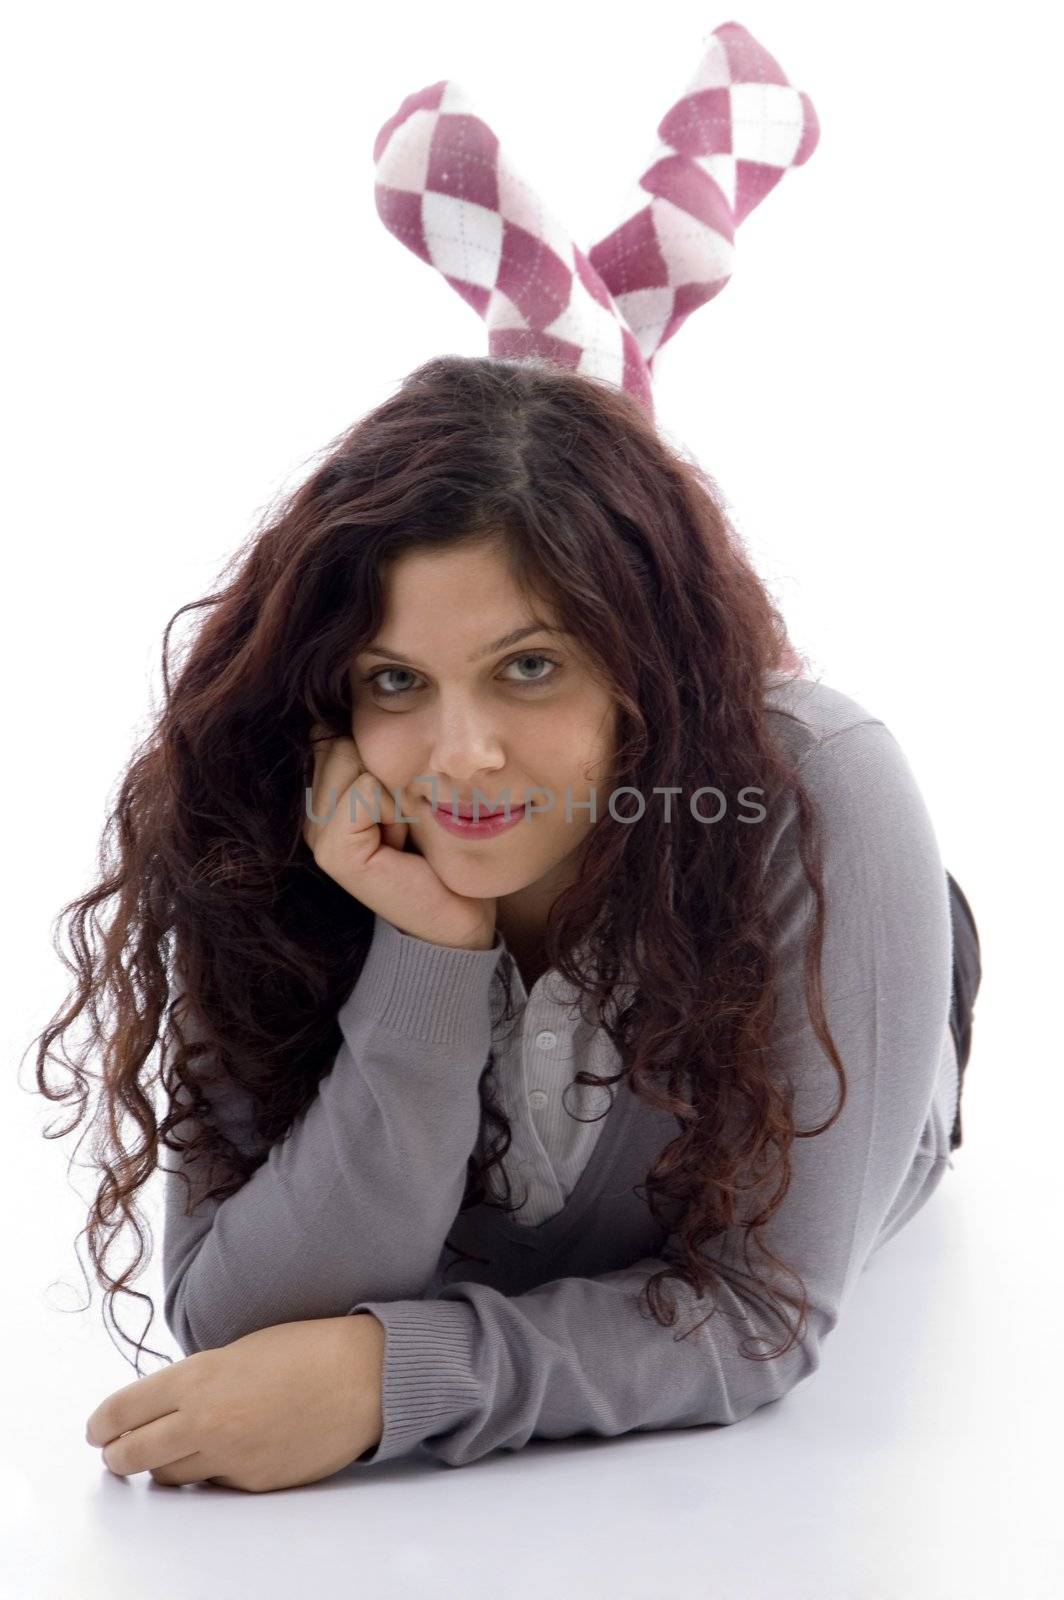 female looking at camera in stylish lying pose on an isolated white background